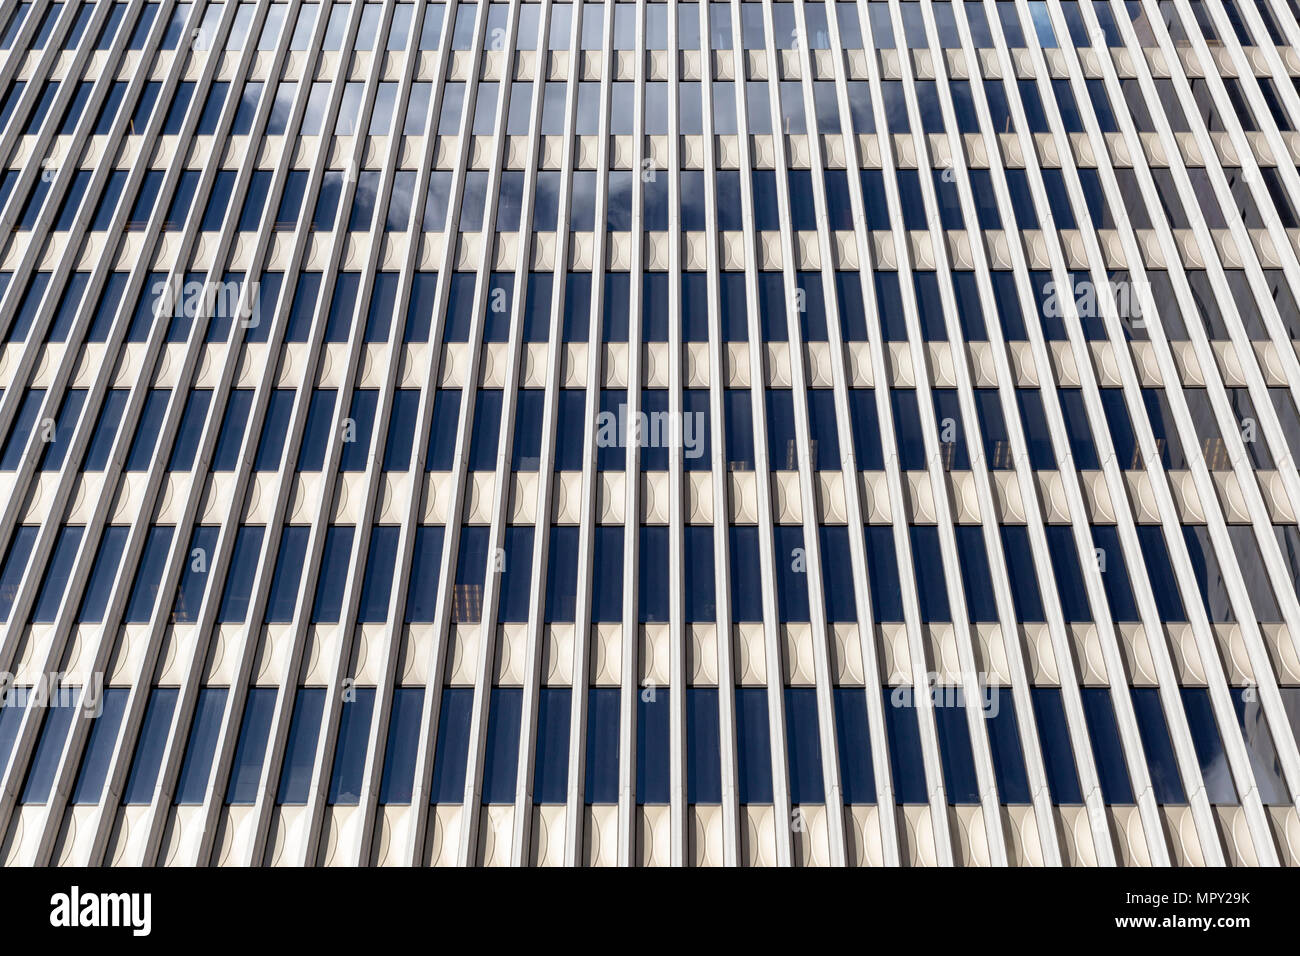 Windows in office building at city Stock Photo